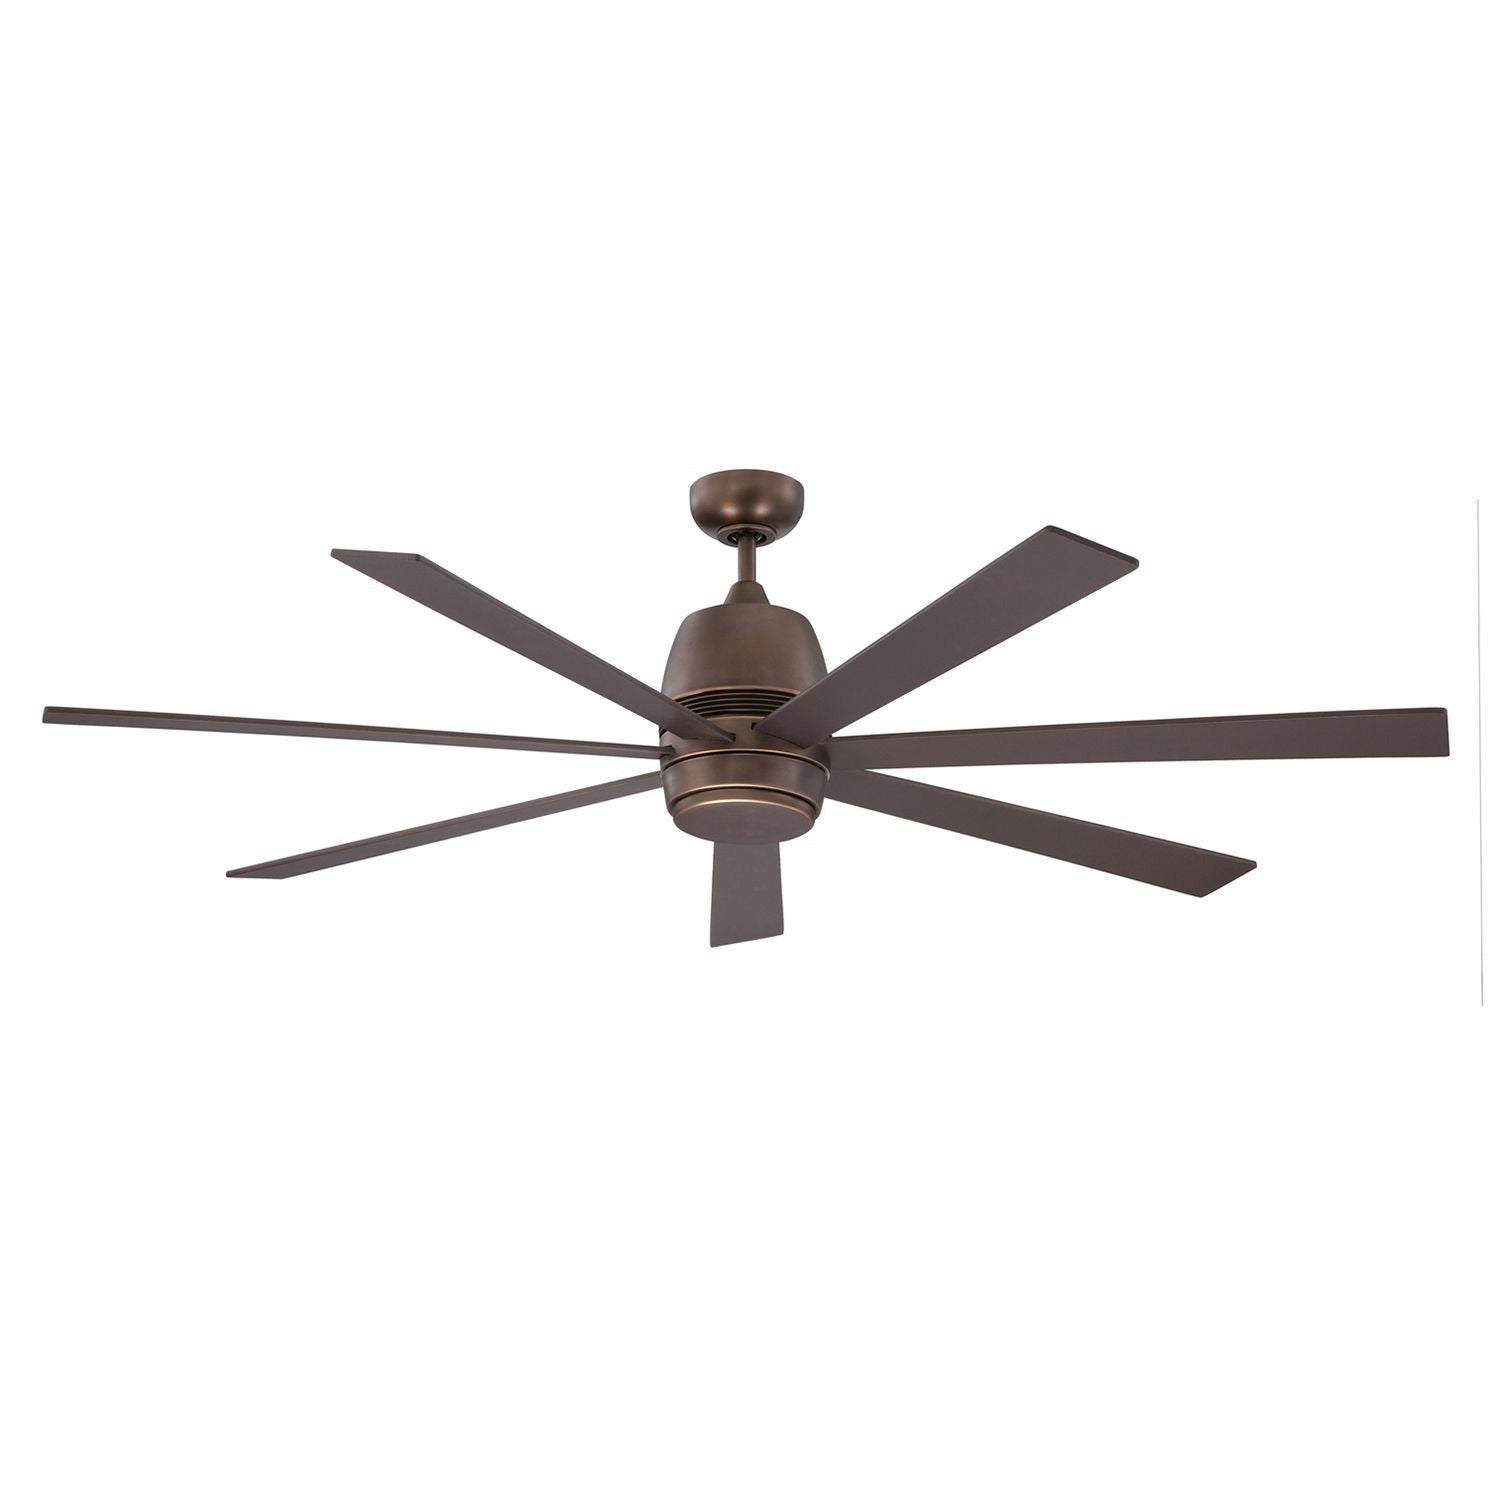 Sixty-Seven Ceiling Fan Architectural Bronze with matching blades